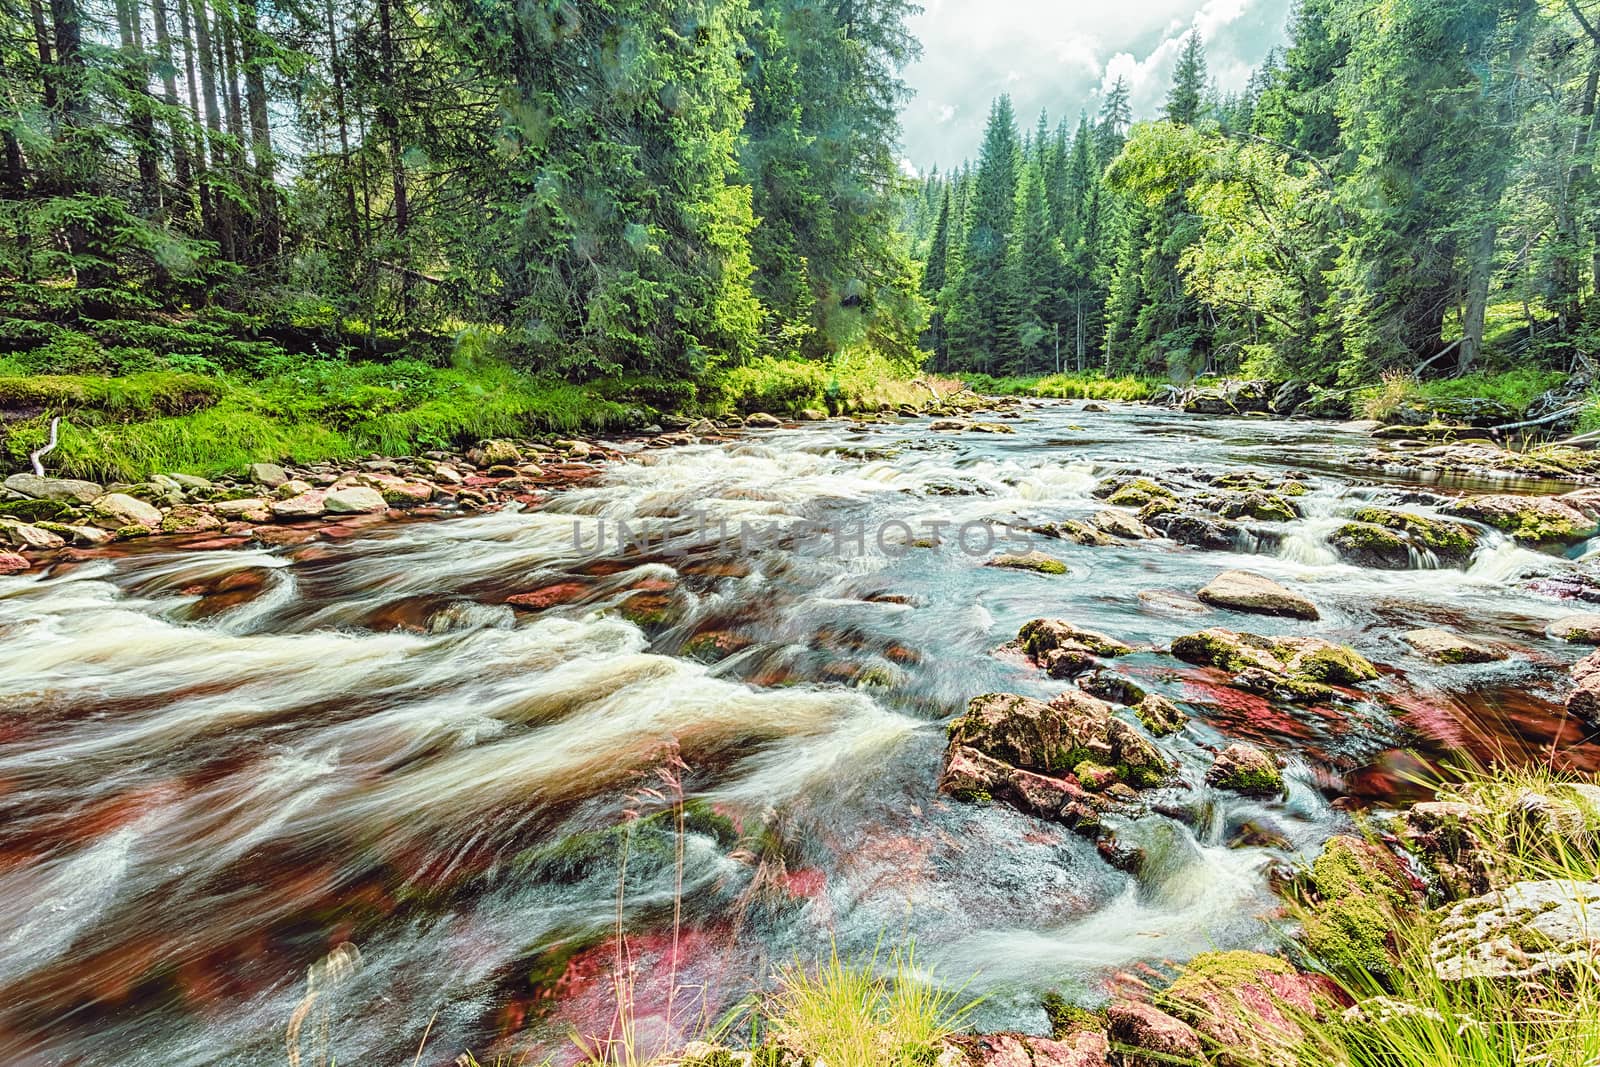 River fast runs over boulders in the primeval forest